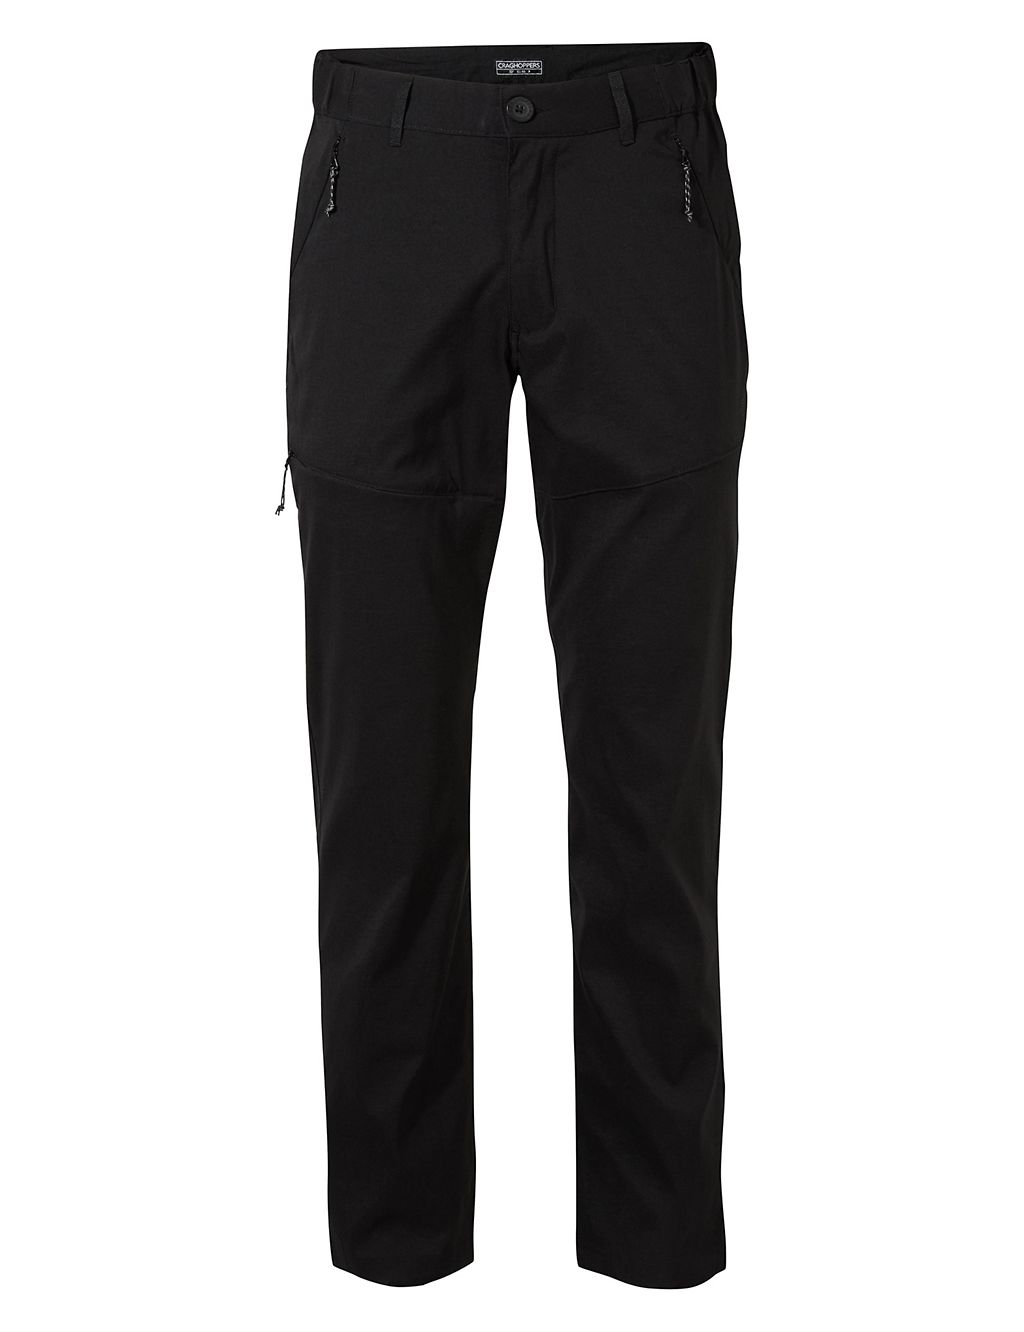 Kiwi Tailored Fit Stretch Trekking Trousers 1 of 5